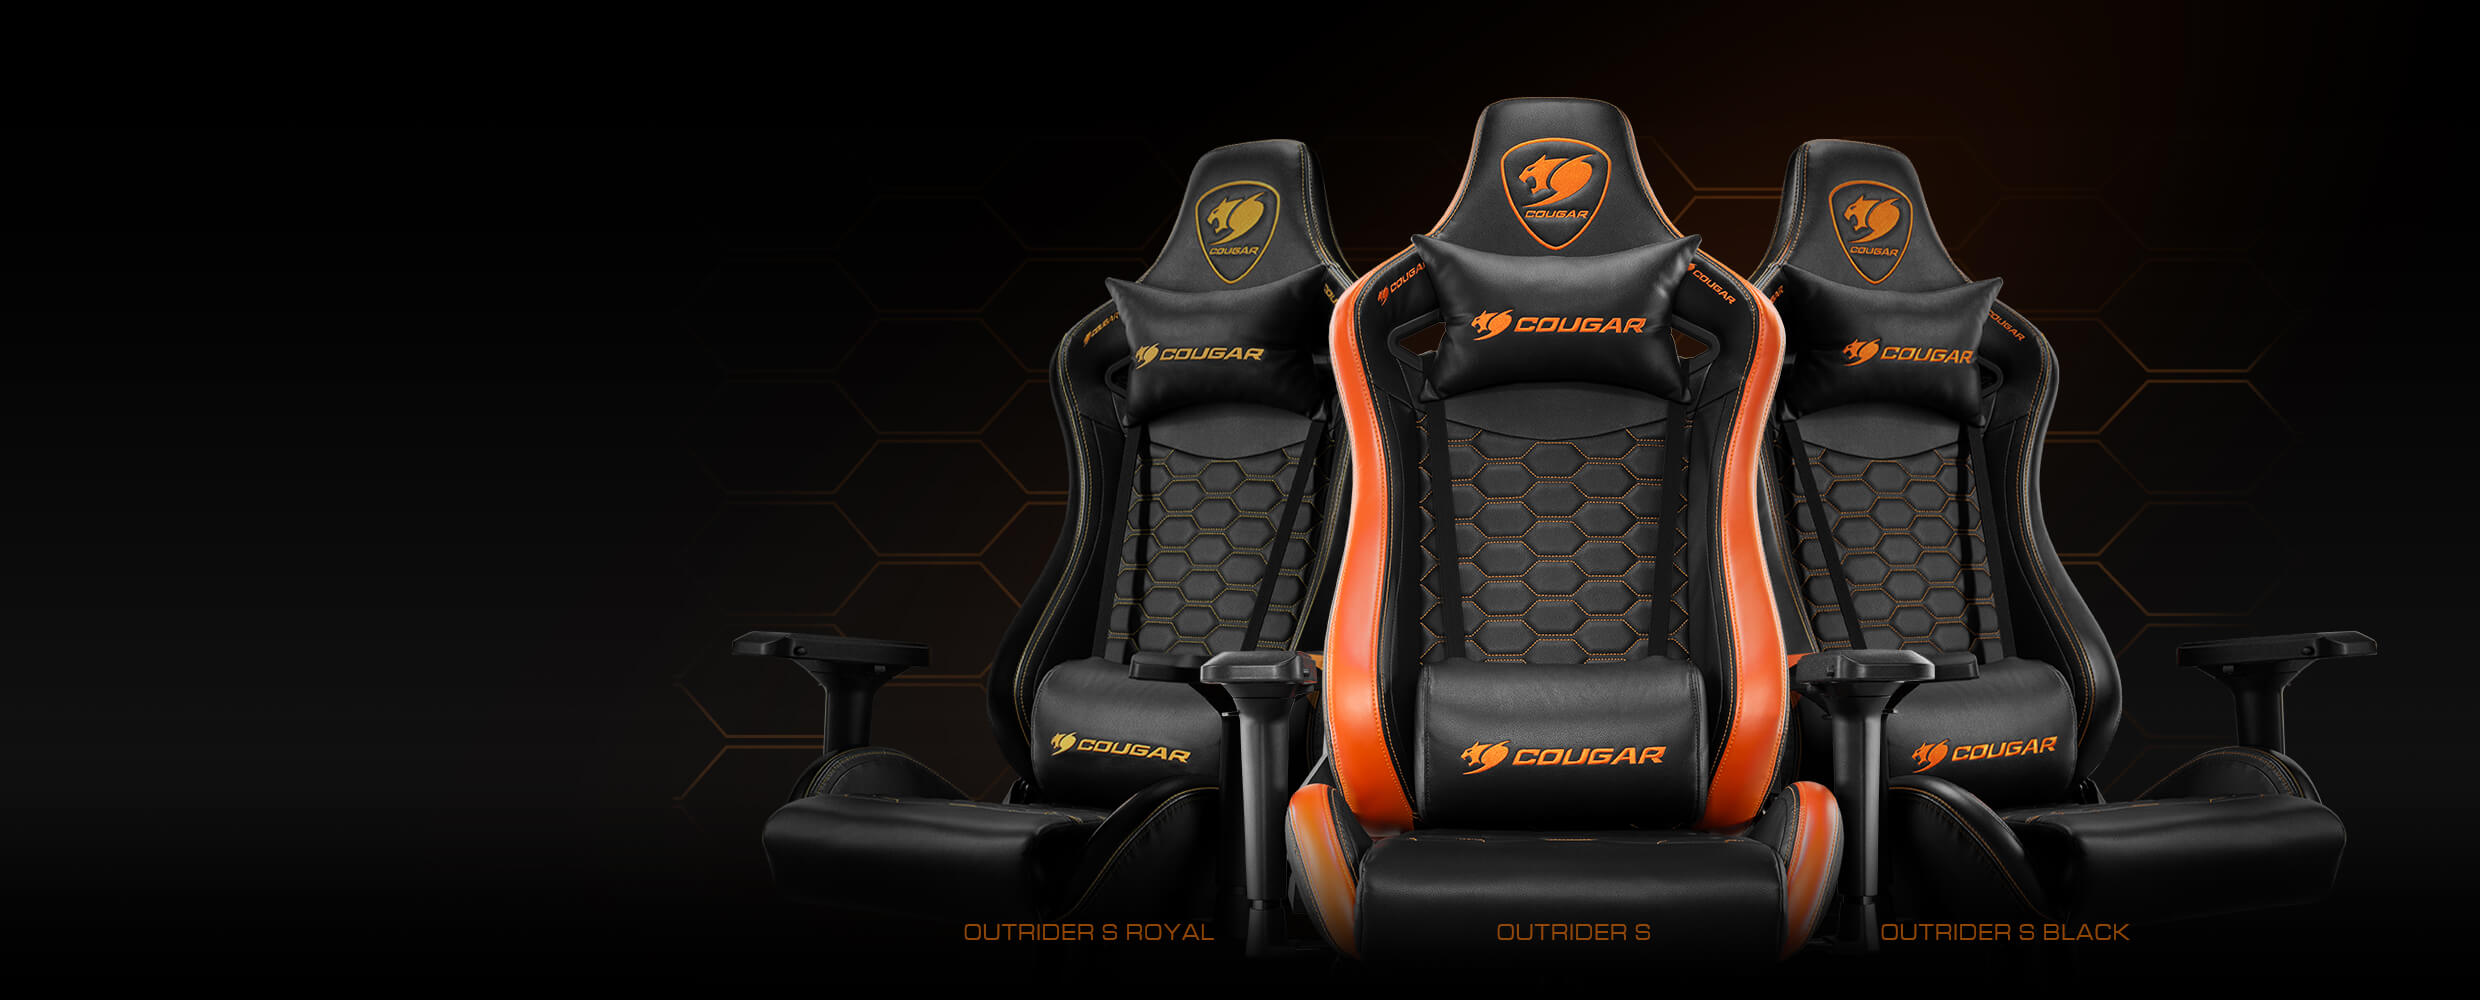 S Royal, Armrest Back Reclining, 4D Chair Body-embracing Gaming with Design,180º Outrider COUGAR High